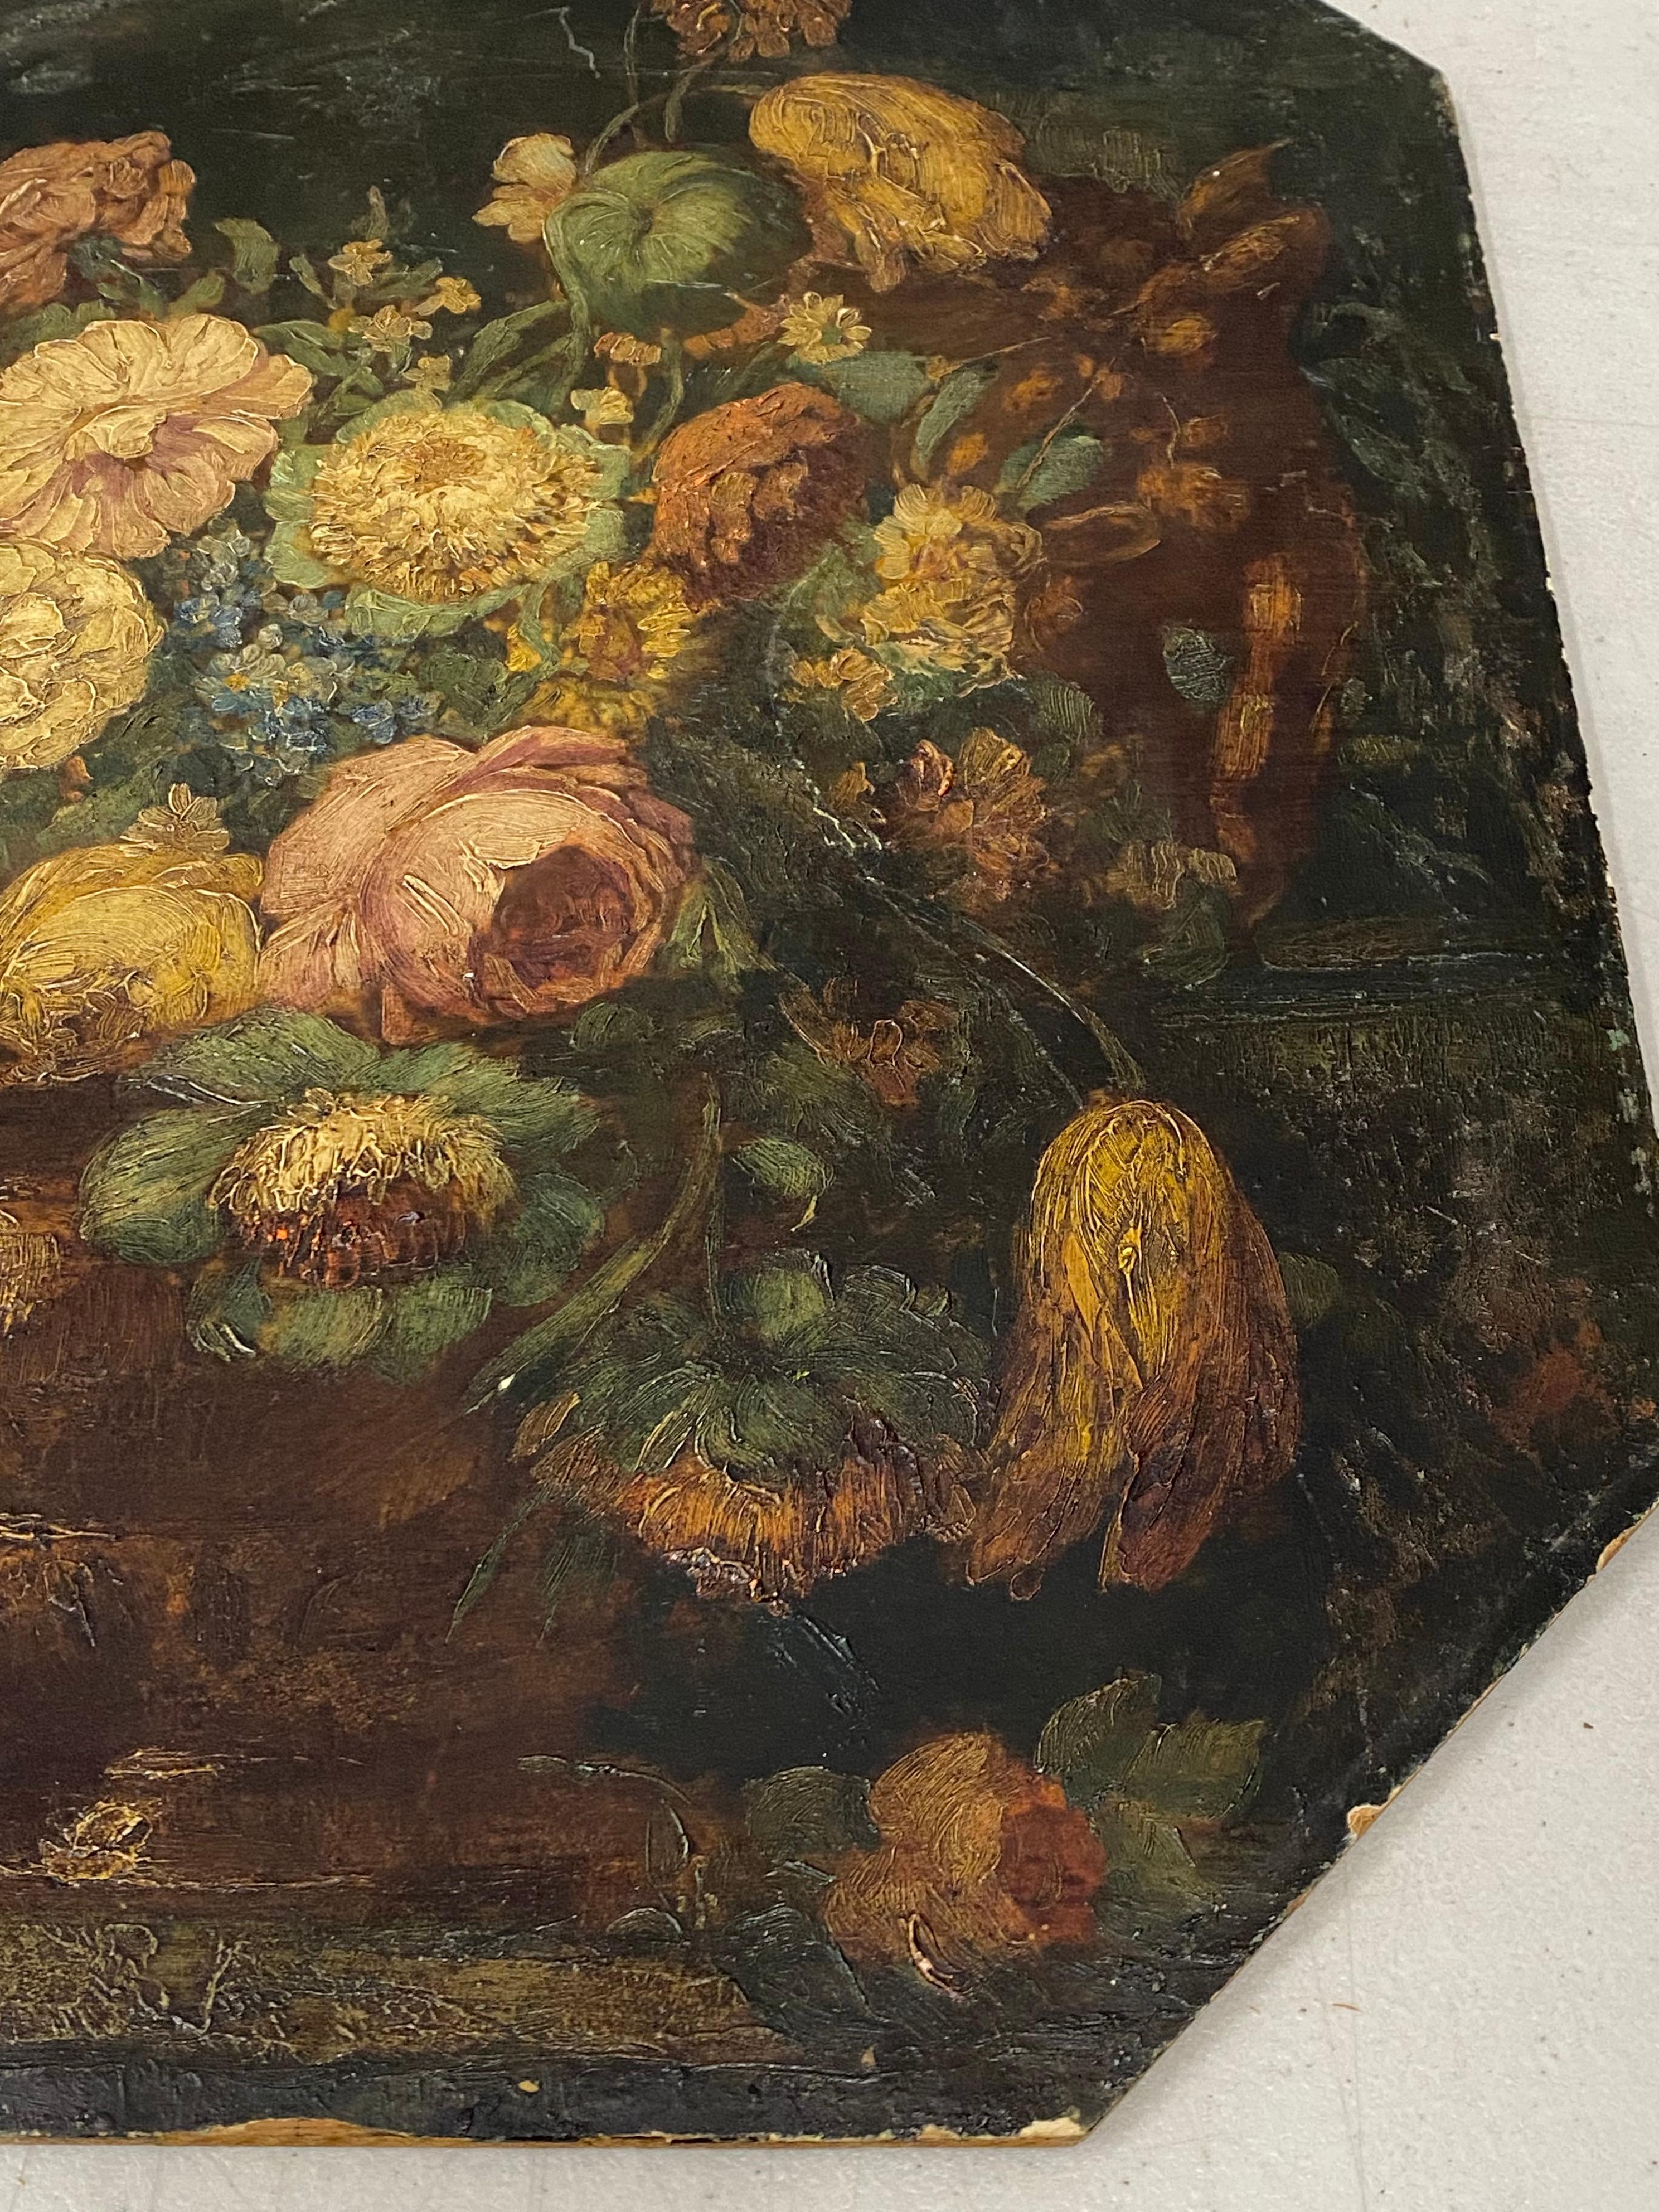 Mid 19th Century Octagonal Panel Floral Still Life Oil Painting

Classic European school oil painting with some old master sensibilities

Original oil on octagonal panel

Dimensions 16